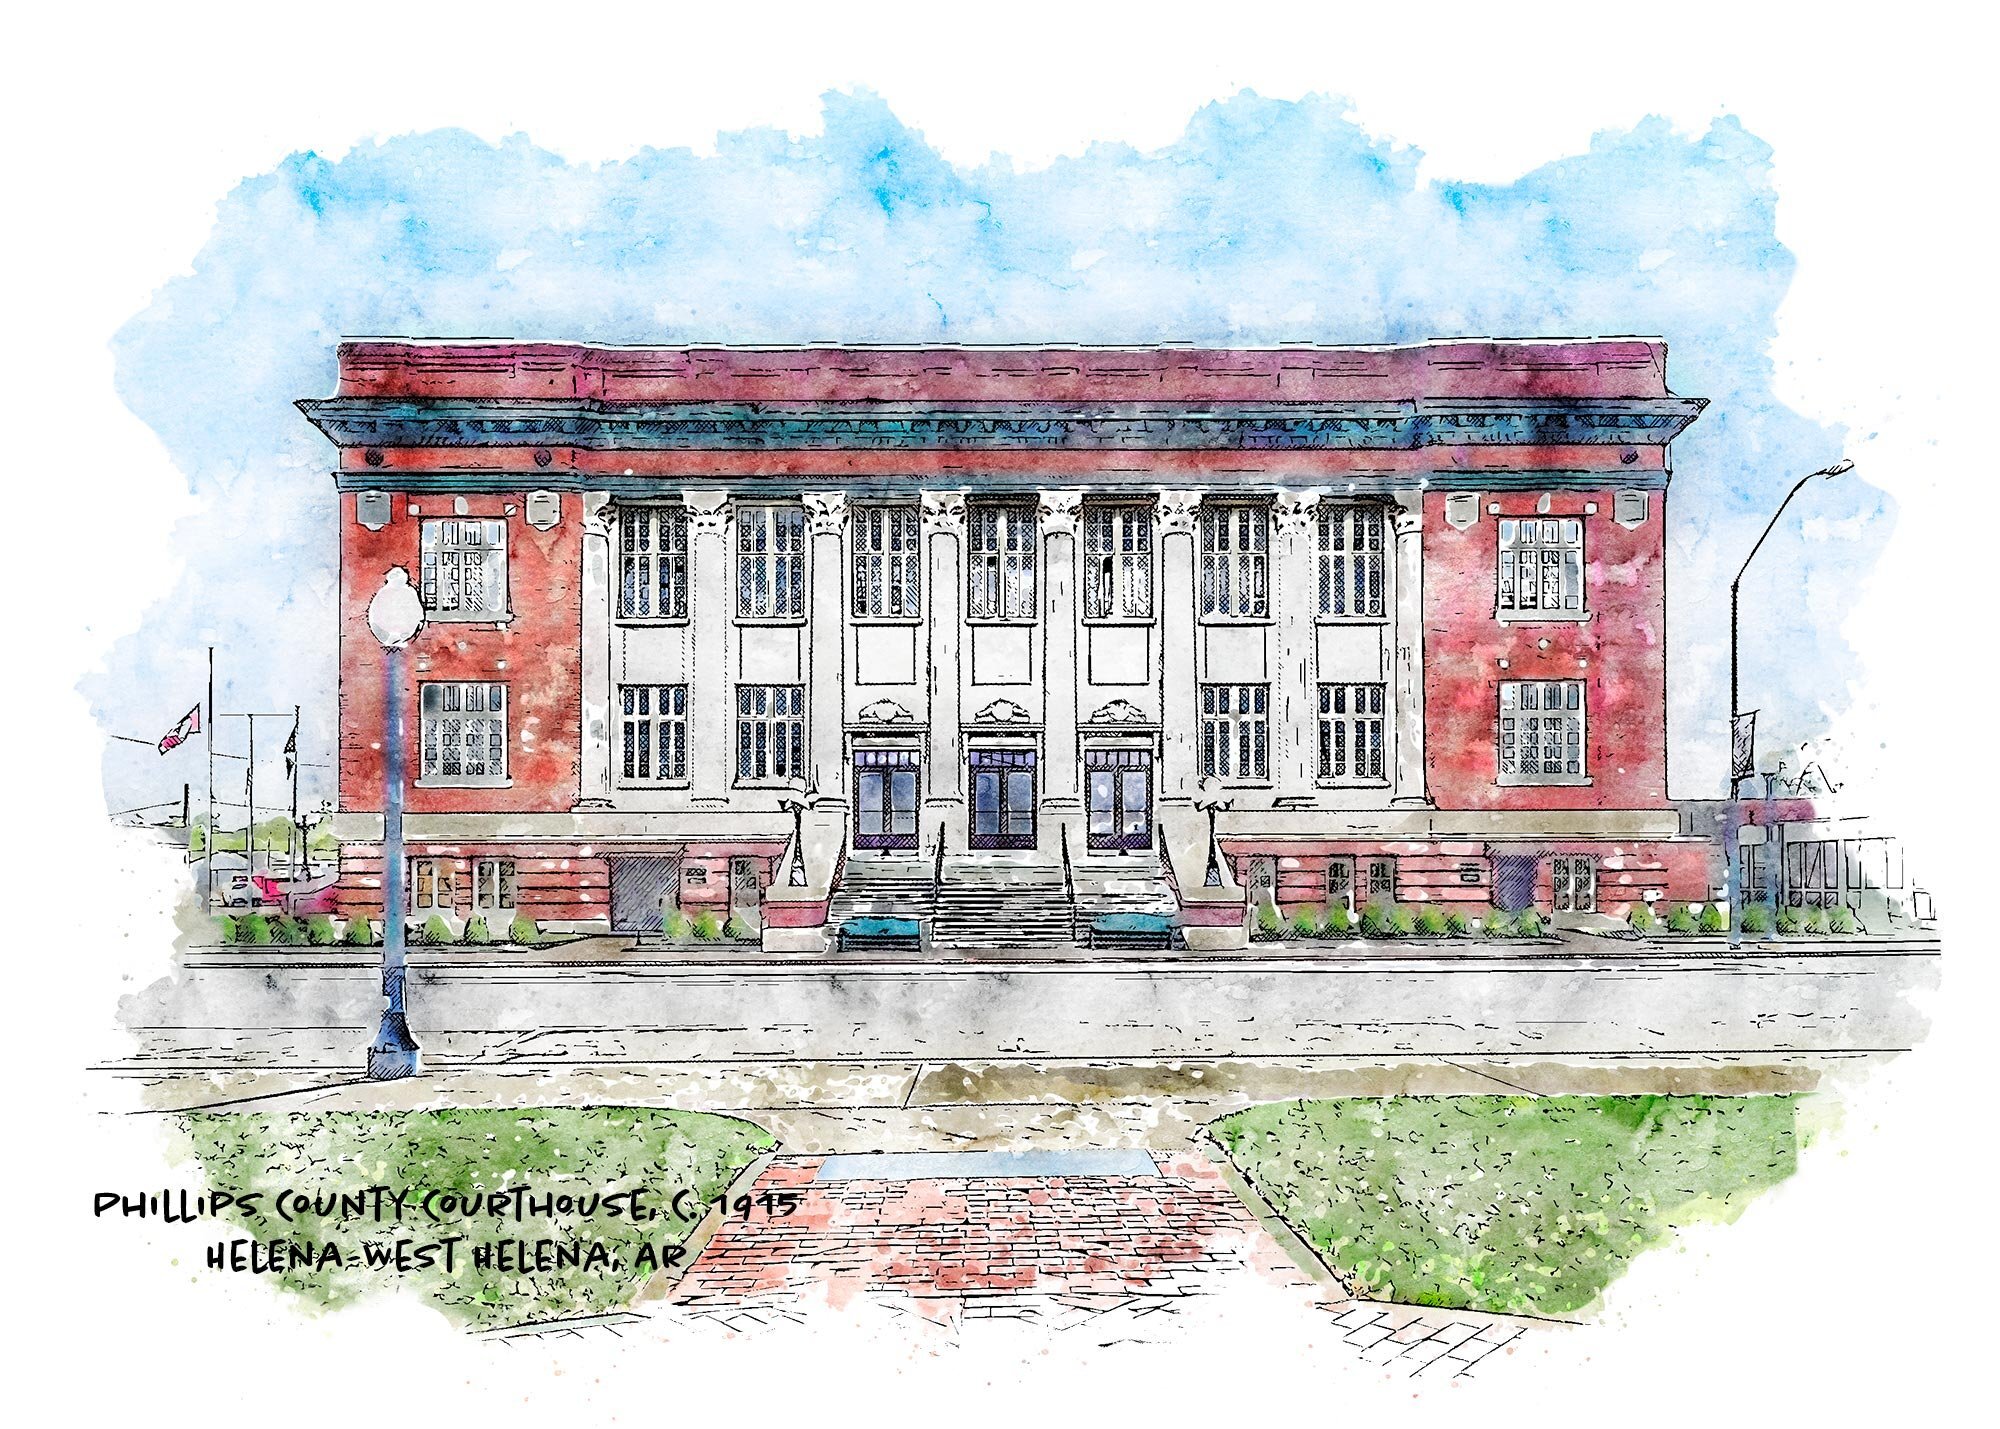 We're on a roll!  We Just added our 29th #historic #Arkansas #Courthouse, the Phillips County Courthouse in Helena-West Helena, Arkansas. 

A Photographic Illustration by Bonnie Alberts
Part of She's Arkansas Heritage Collection, Phillips County Cour